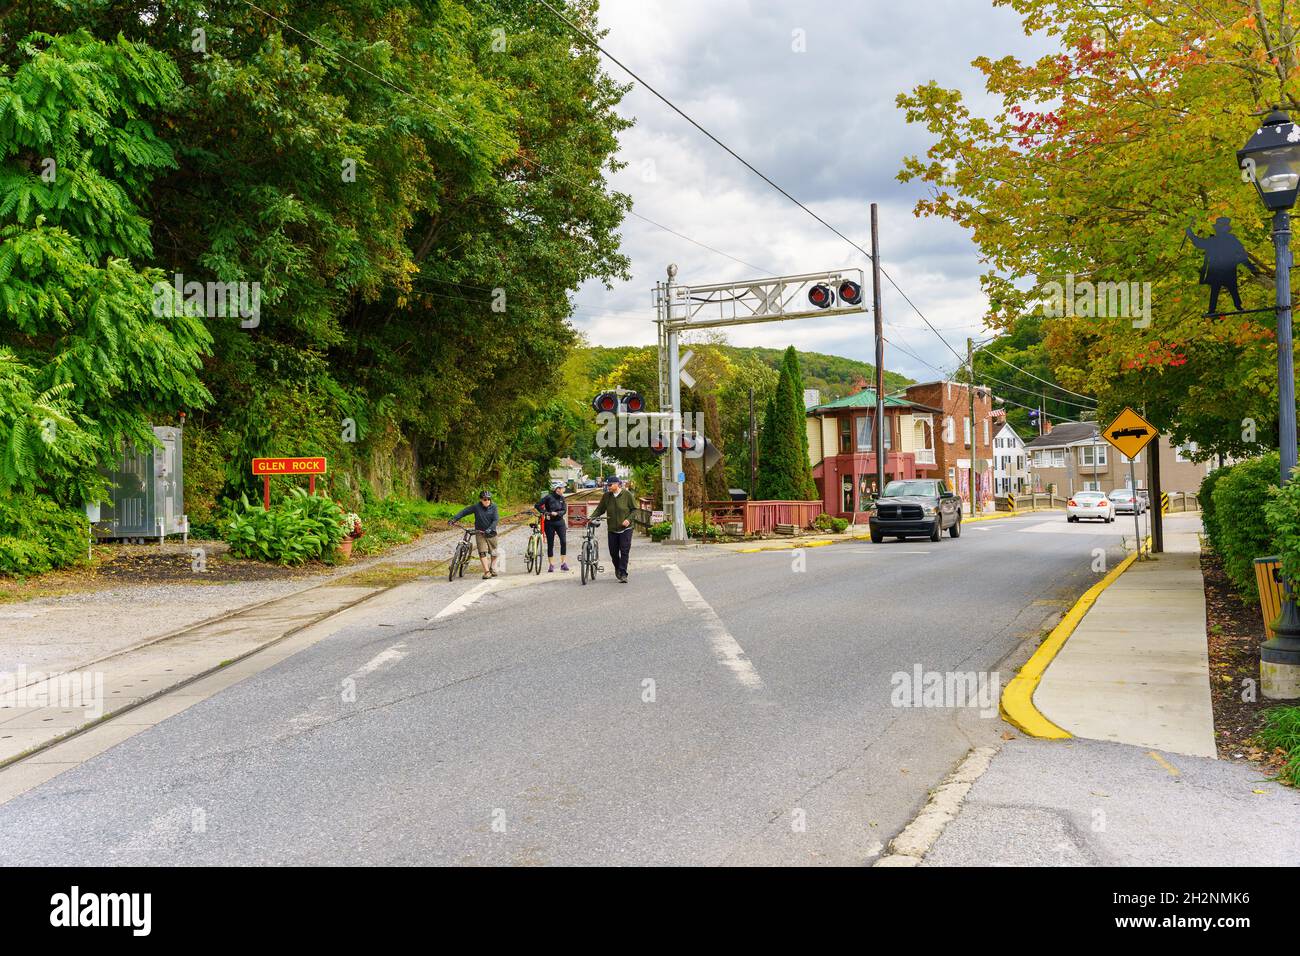 Glen Rock, PA, USA - October 17, 2021: Bicycle riders using  the York County Heritage Rail Trail park system await traffic to cross a downtown street. Stock Photo